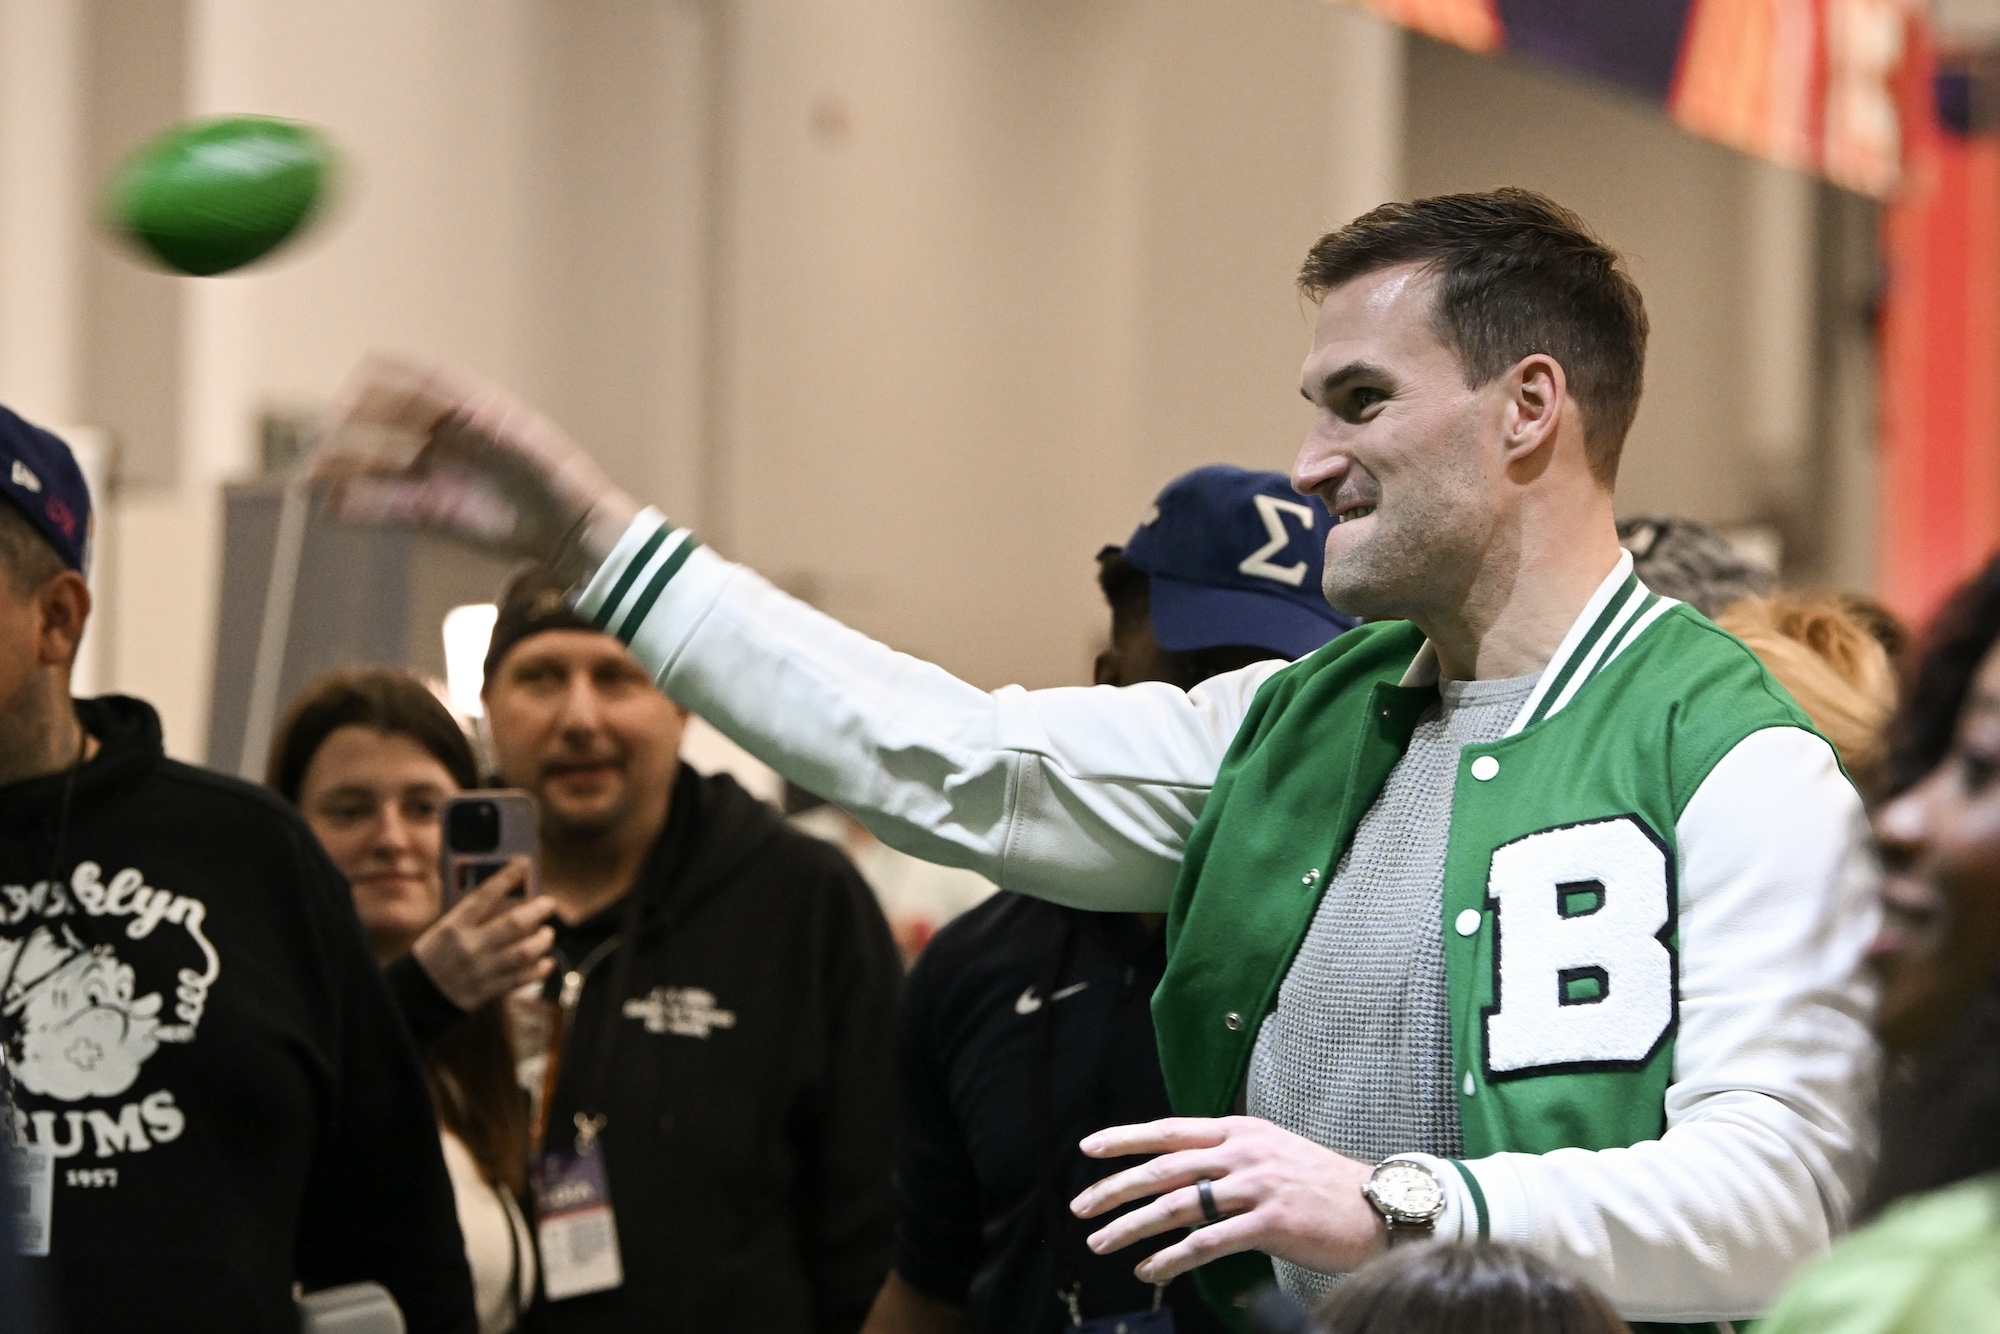 LAS VEGAS, NEVADA - FEBRUARY 09: Kirk Cousins throws a mini football at Radio Row at the Mandalay Bay Convention Center ahead of Super Bowl LVIII on February 09, 2024 in Las Vegas, Nevada. (Photo by Candice Ward/Getty Images)